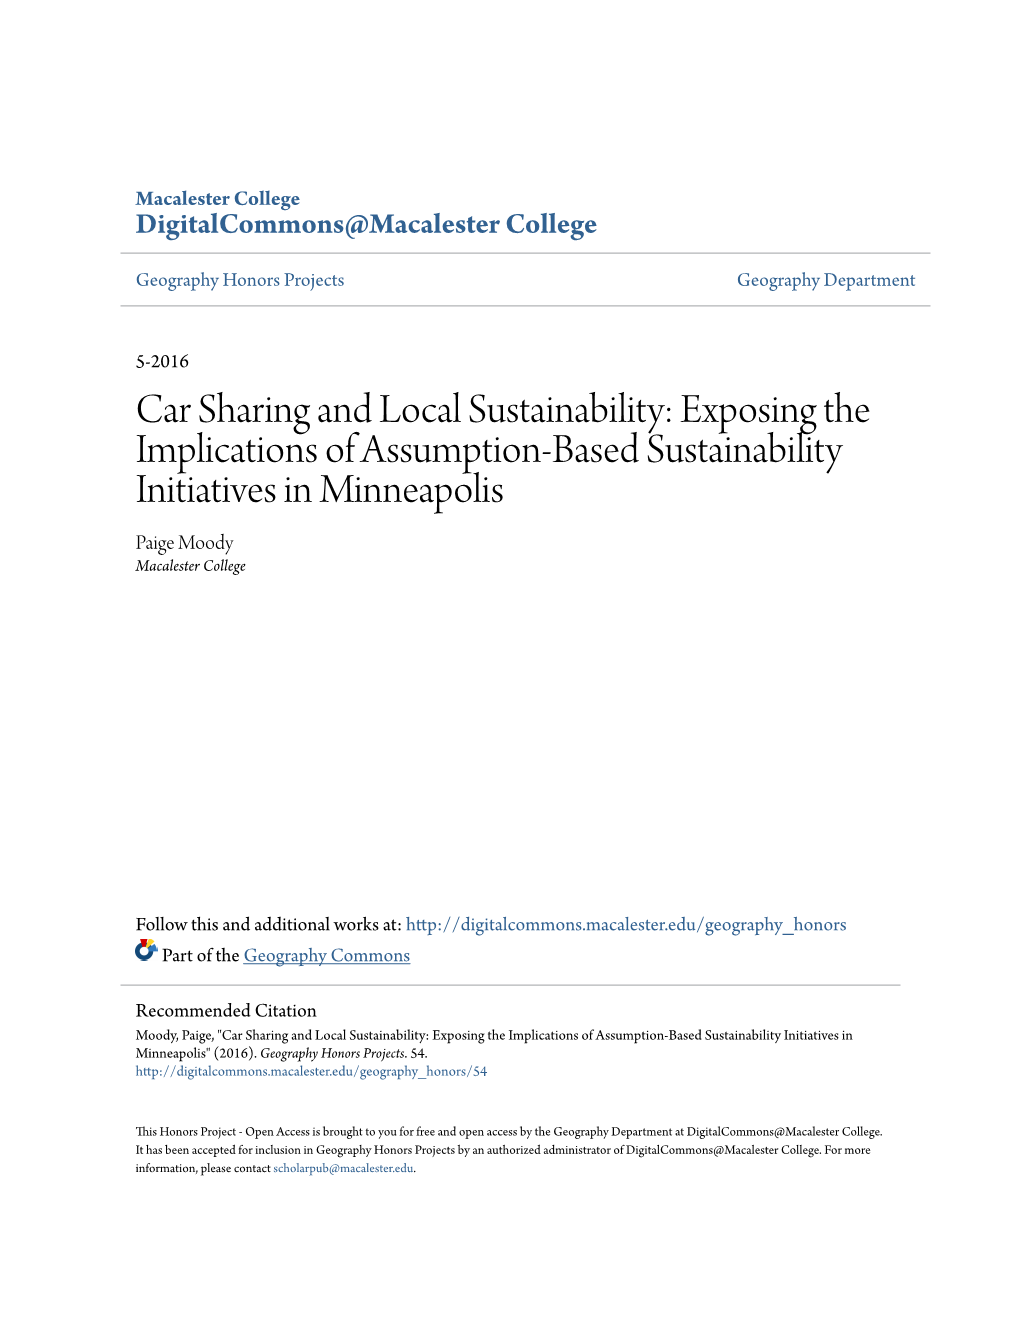 Car Sharing and Local Sustainability: Exposing the Implications of Assumption-Based Sustainability Initiatives in Minneapolis Paige Moody Macalester College